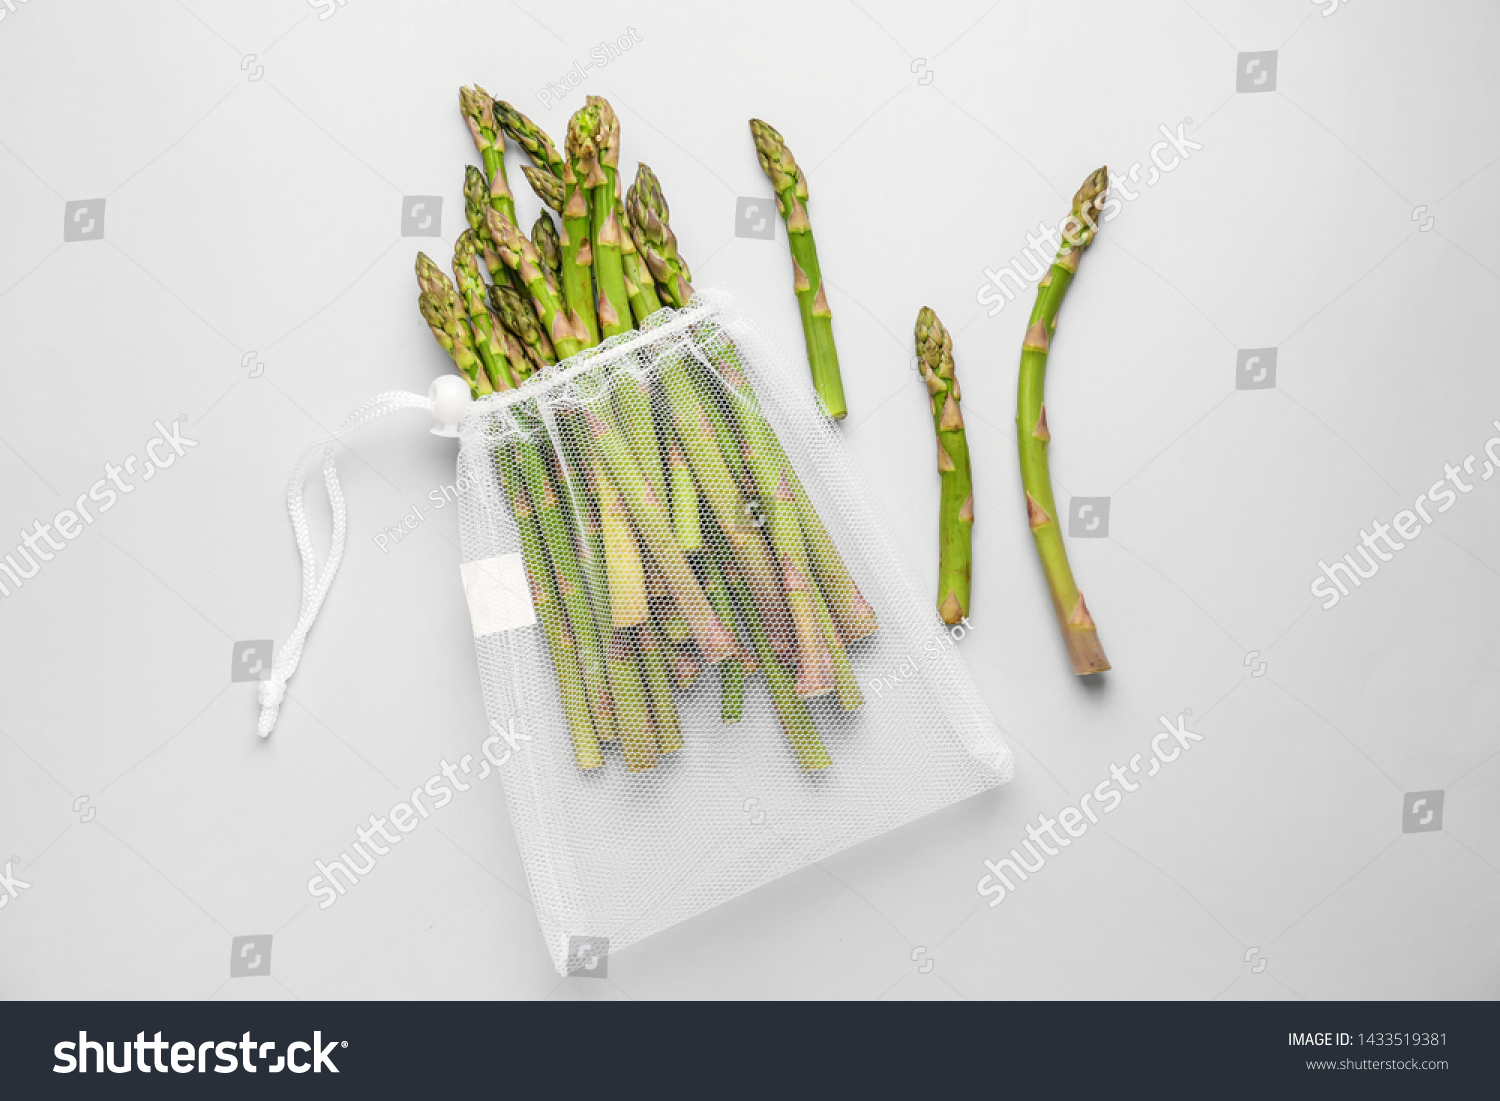 Eco bag with asparagus on light background #1433519381